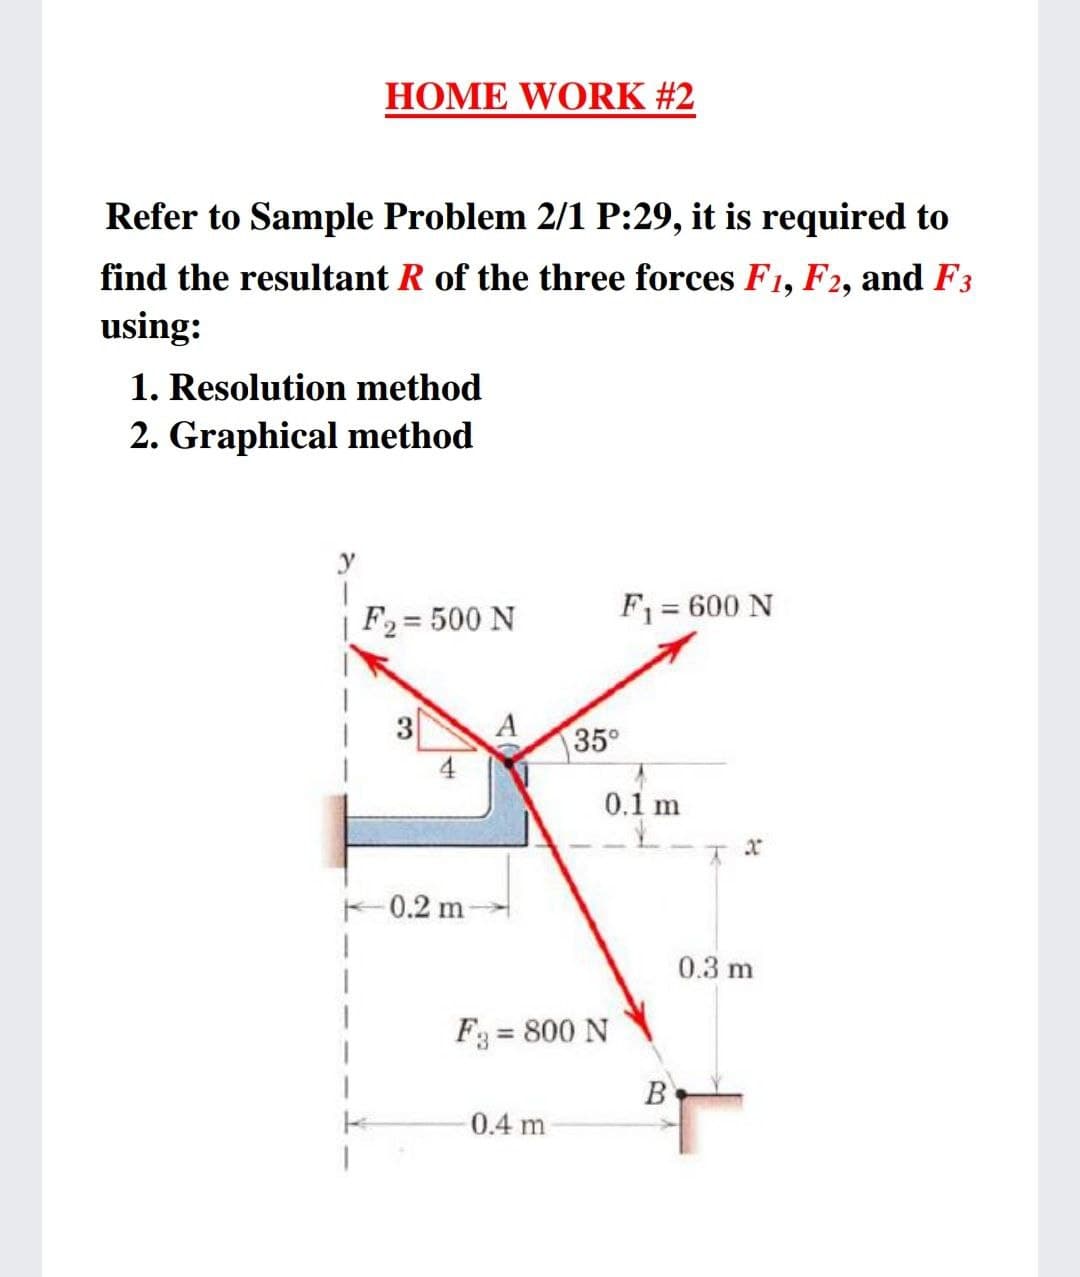 HOME WORK #2
Refer to Sample Problem 2/1 P:29, it is required to
find the resultant R of the three forces F1, F2, and F3
using:
1. Resolution method
2. Graphical method
y
F2 = 500 N
F = 600 N
3
35°
4
0.1 m
F0.2 m
0.3 m
F3 = 800 N
%3D
B
0.4 m
